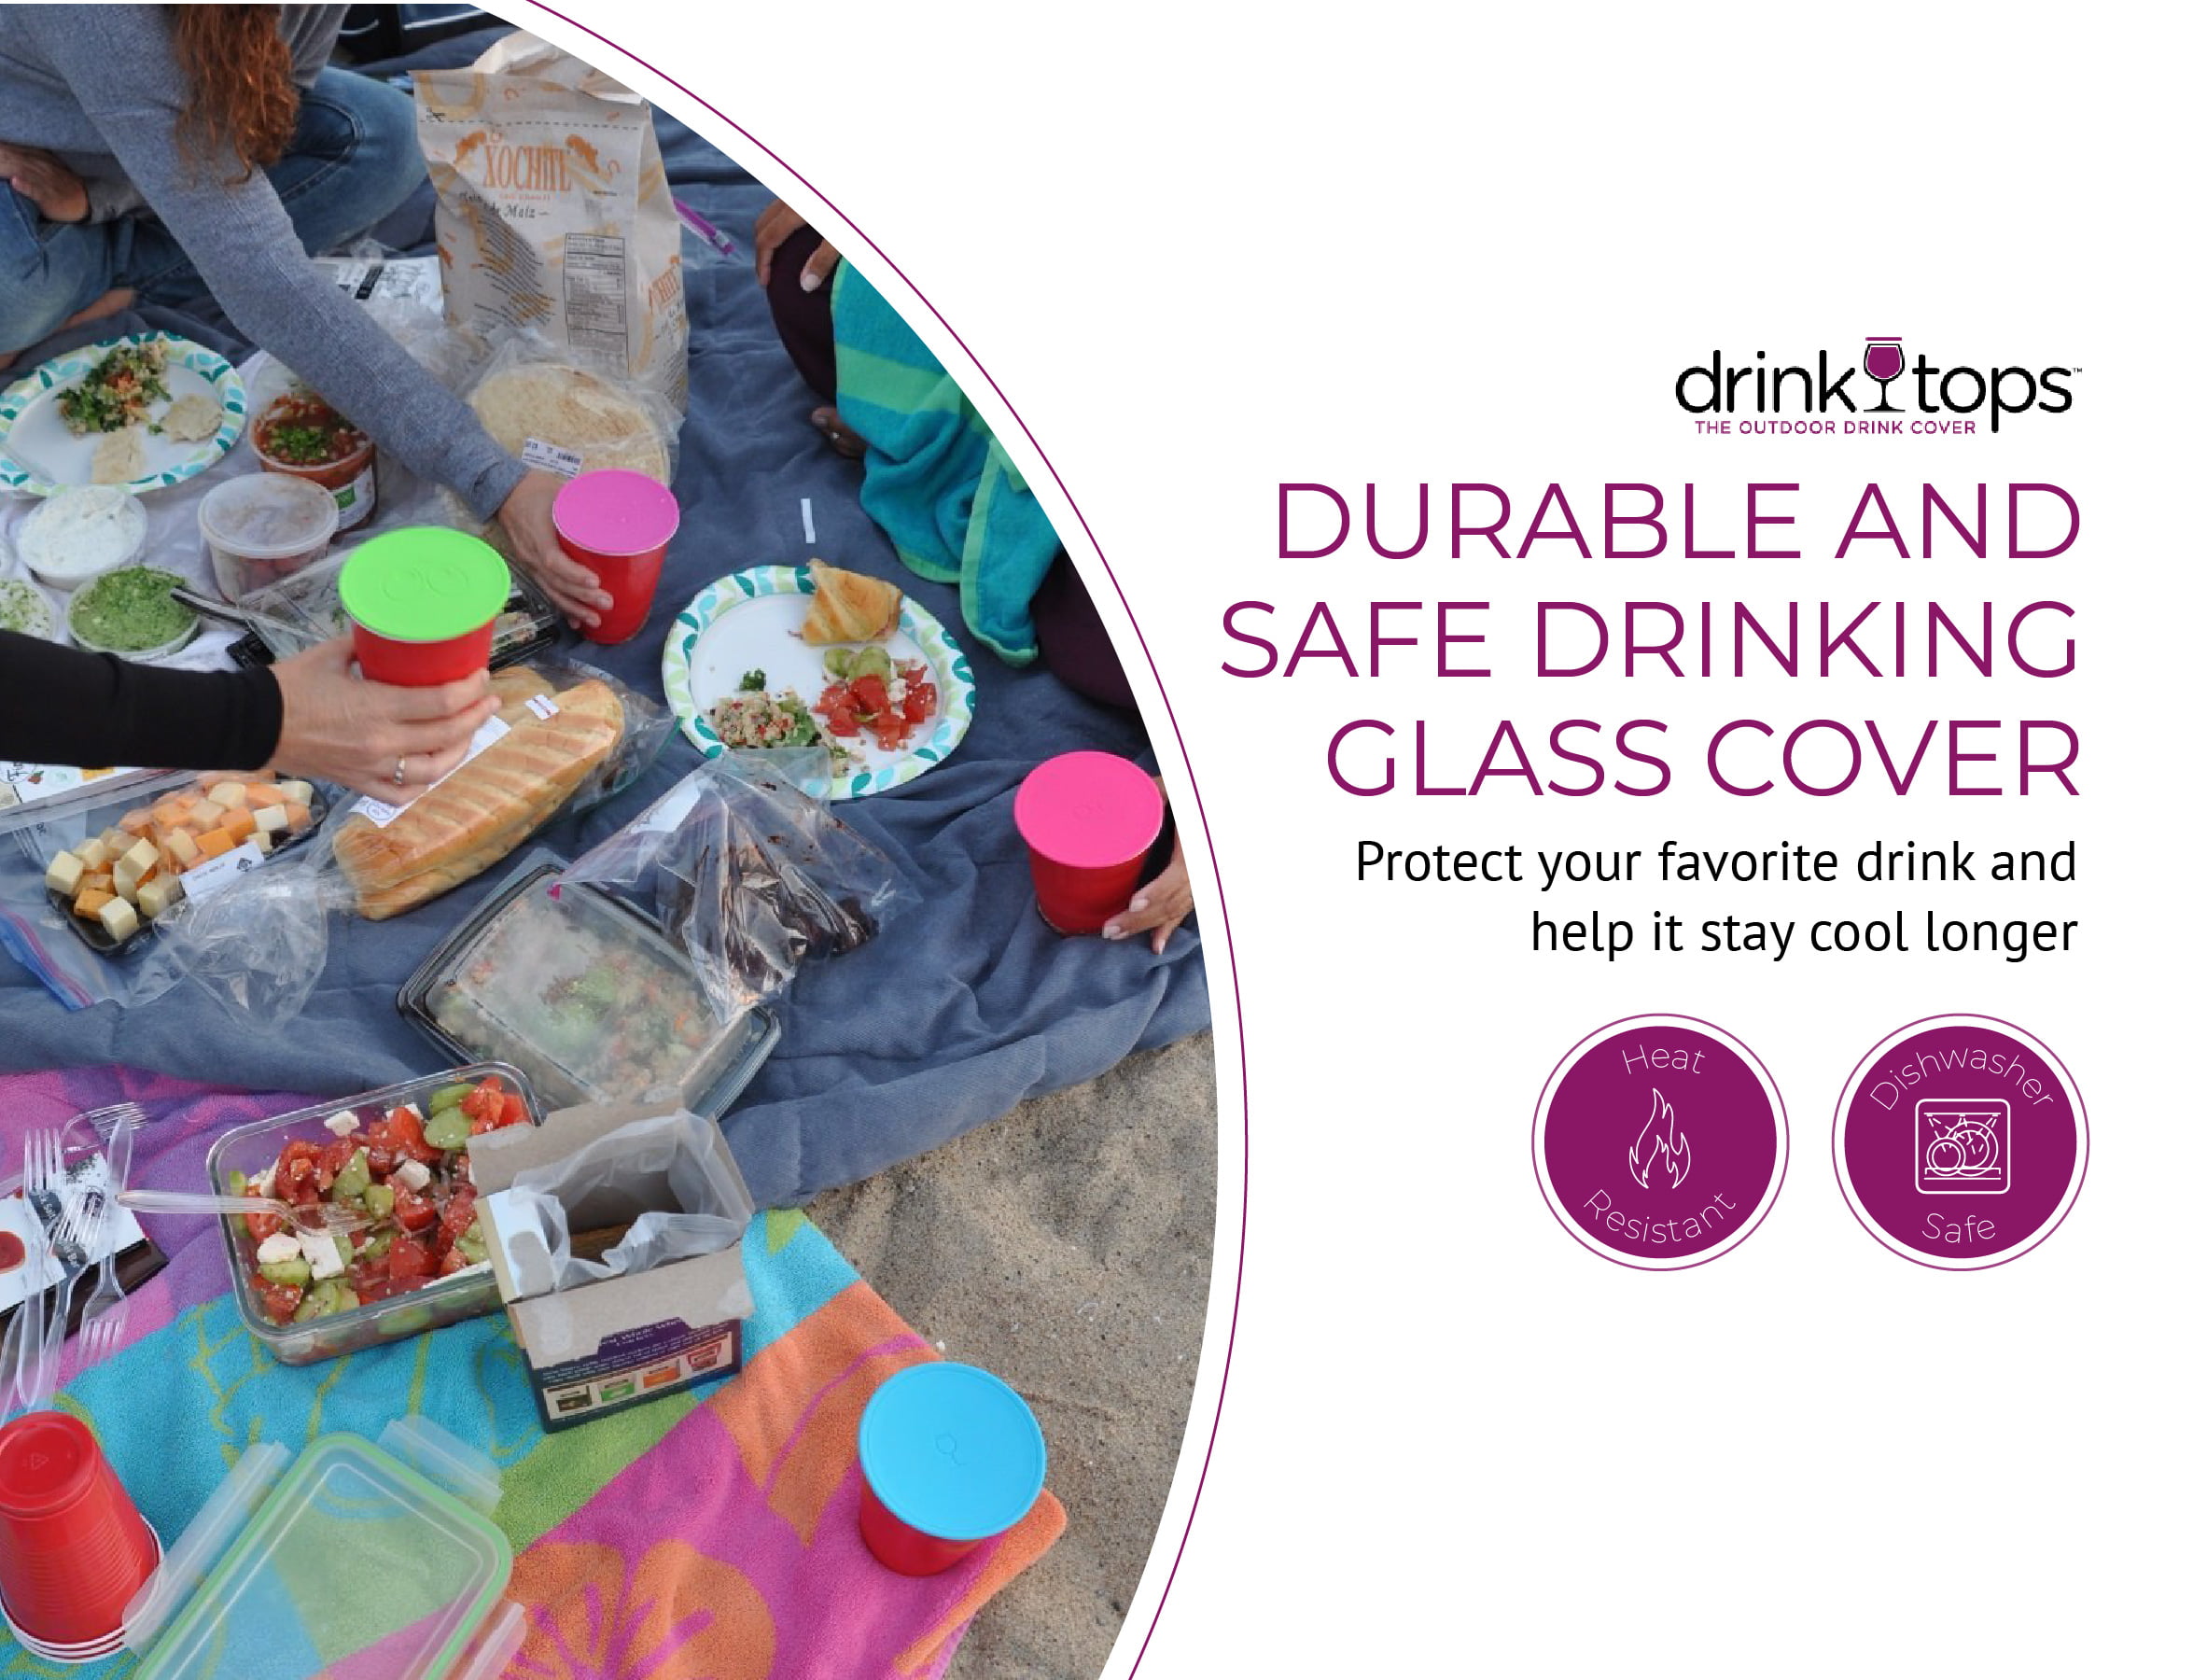 Drink Protection Cover | 100% Silicone and Reusable, Perfect for Parties,  Bars or Clubs, Fits All Cup Sizes | Stop Worrying About Beverage Safety (6